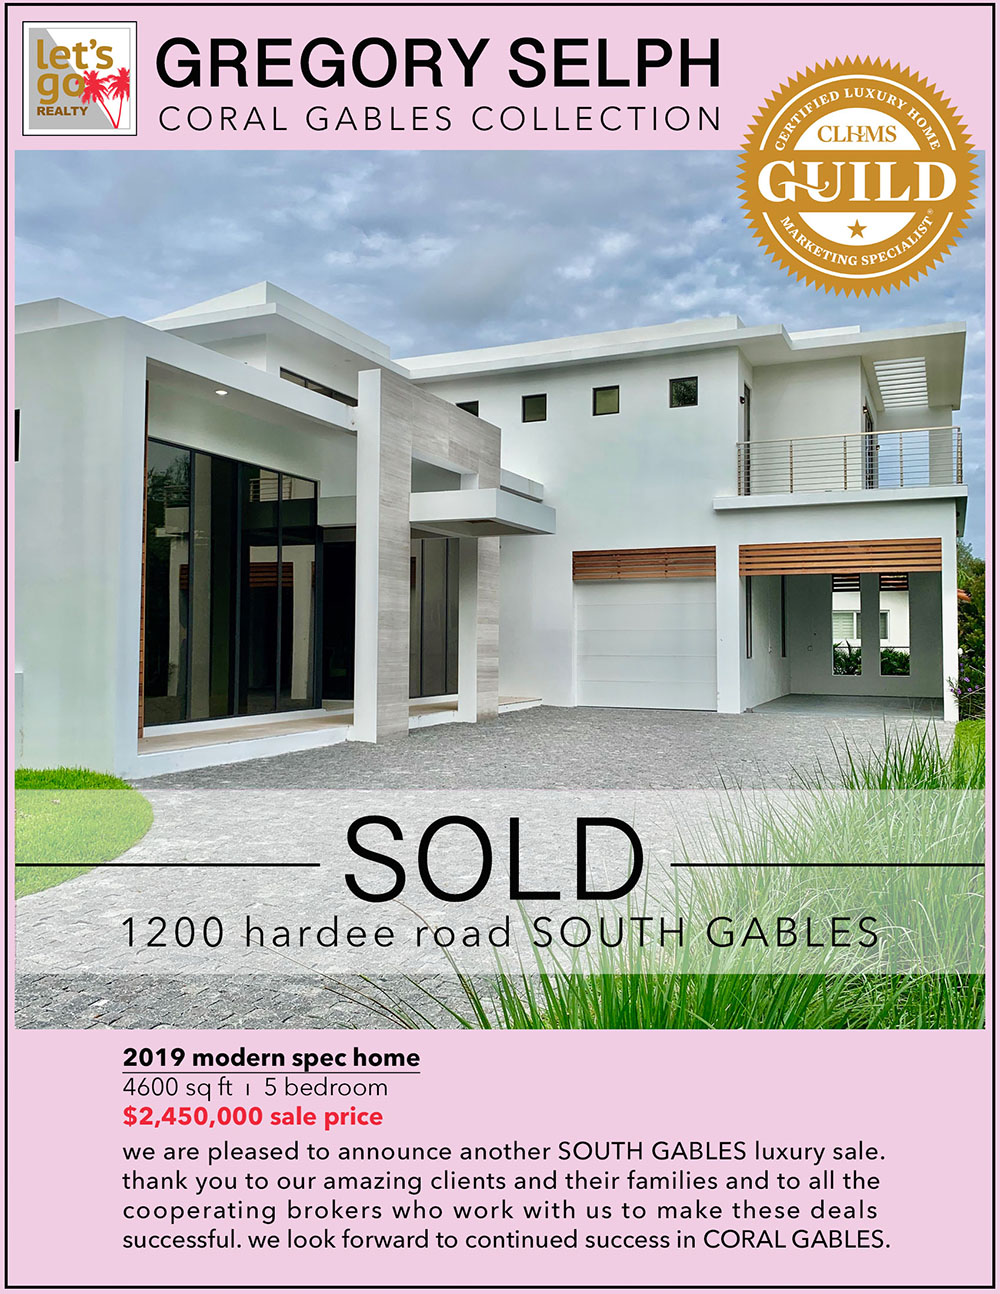 SOLD 1200 hardee rd coral gables FL 33146 #letsgoREALTY